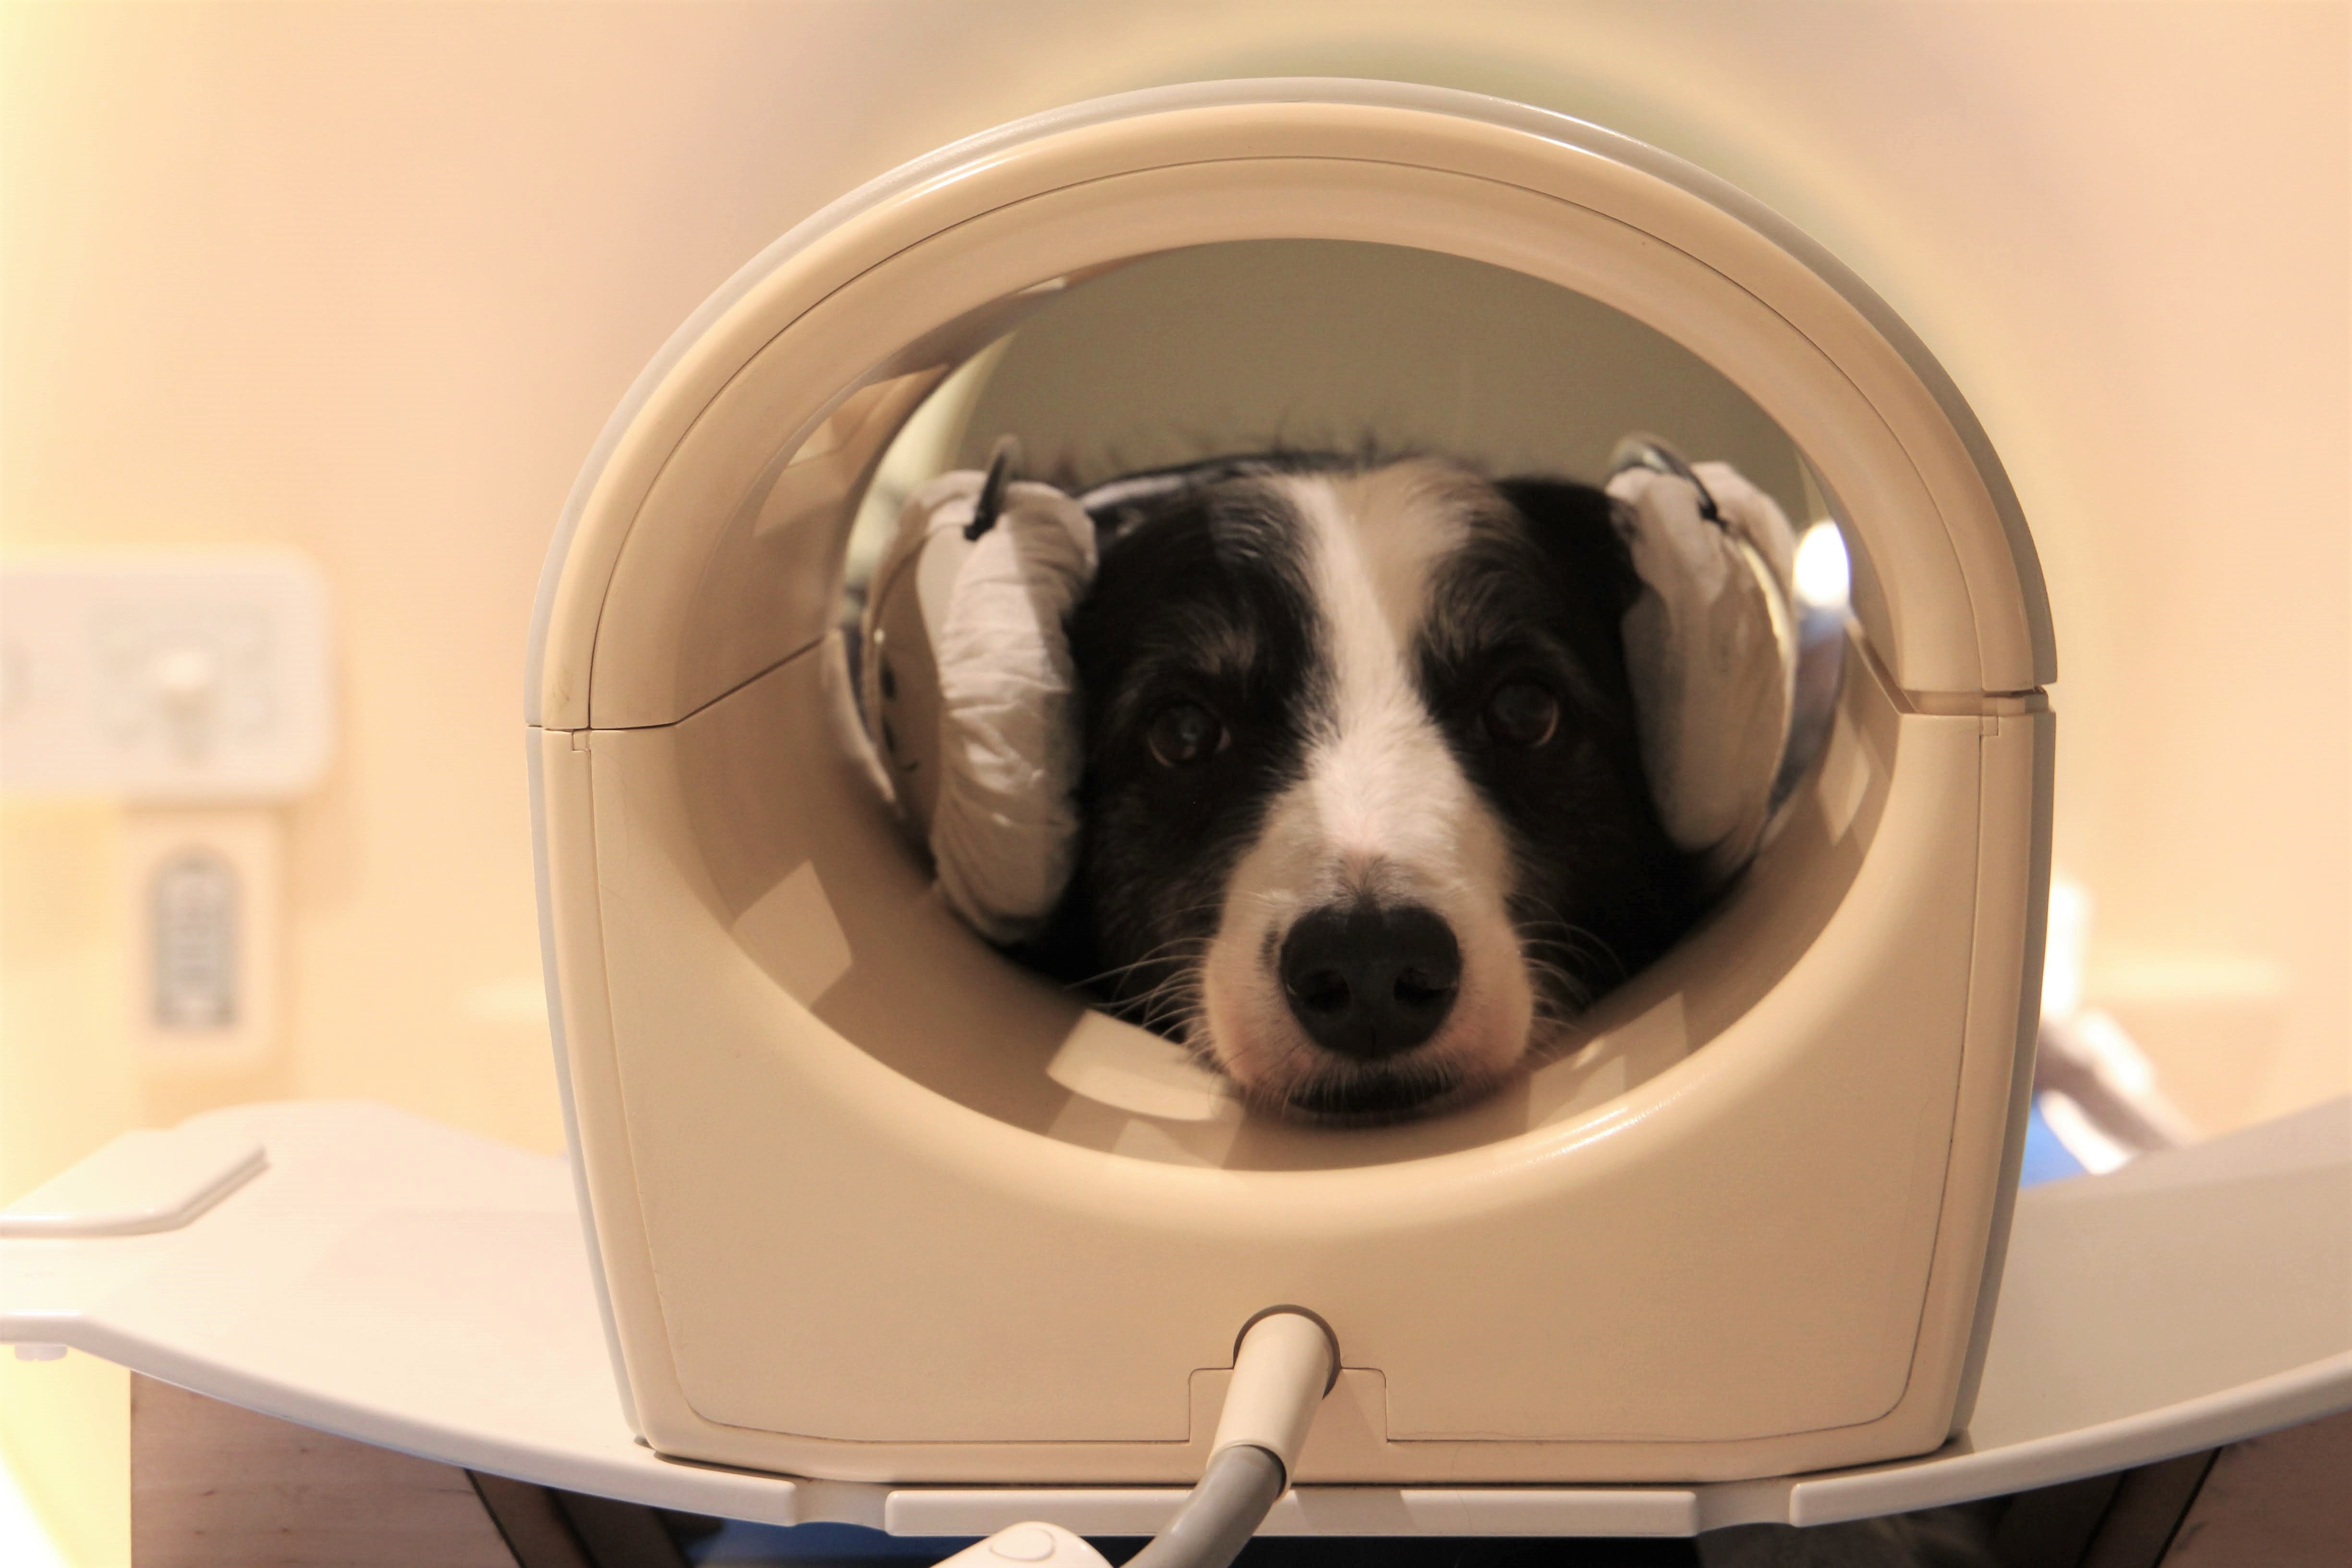 Dog brains can detect speech, and show different activity patterns to a familiar and an unfamiliar language, a new brain imaging study has found